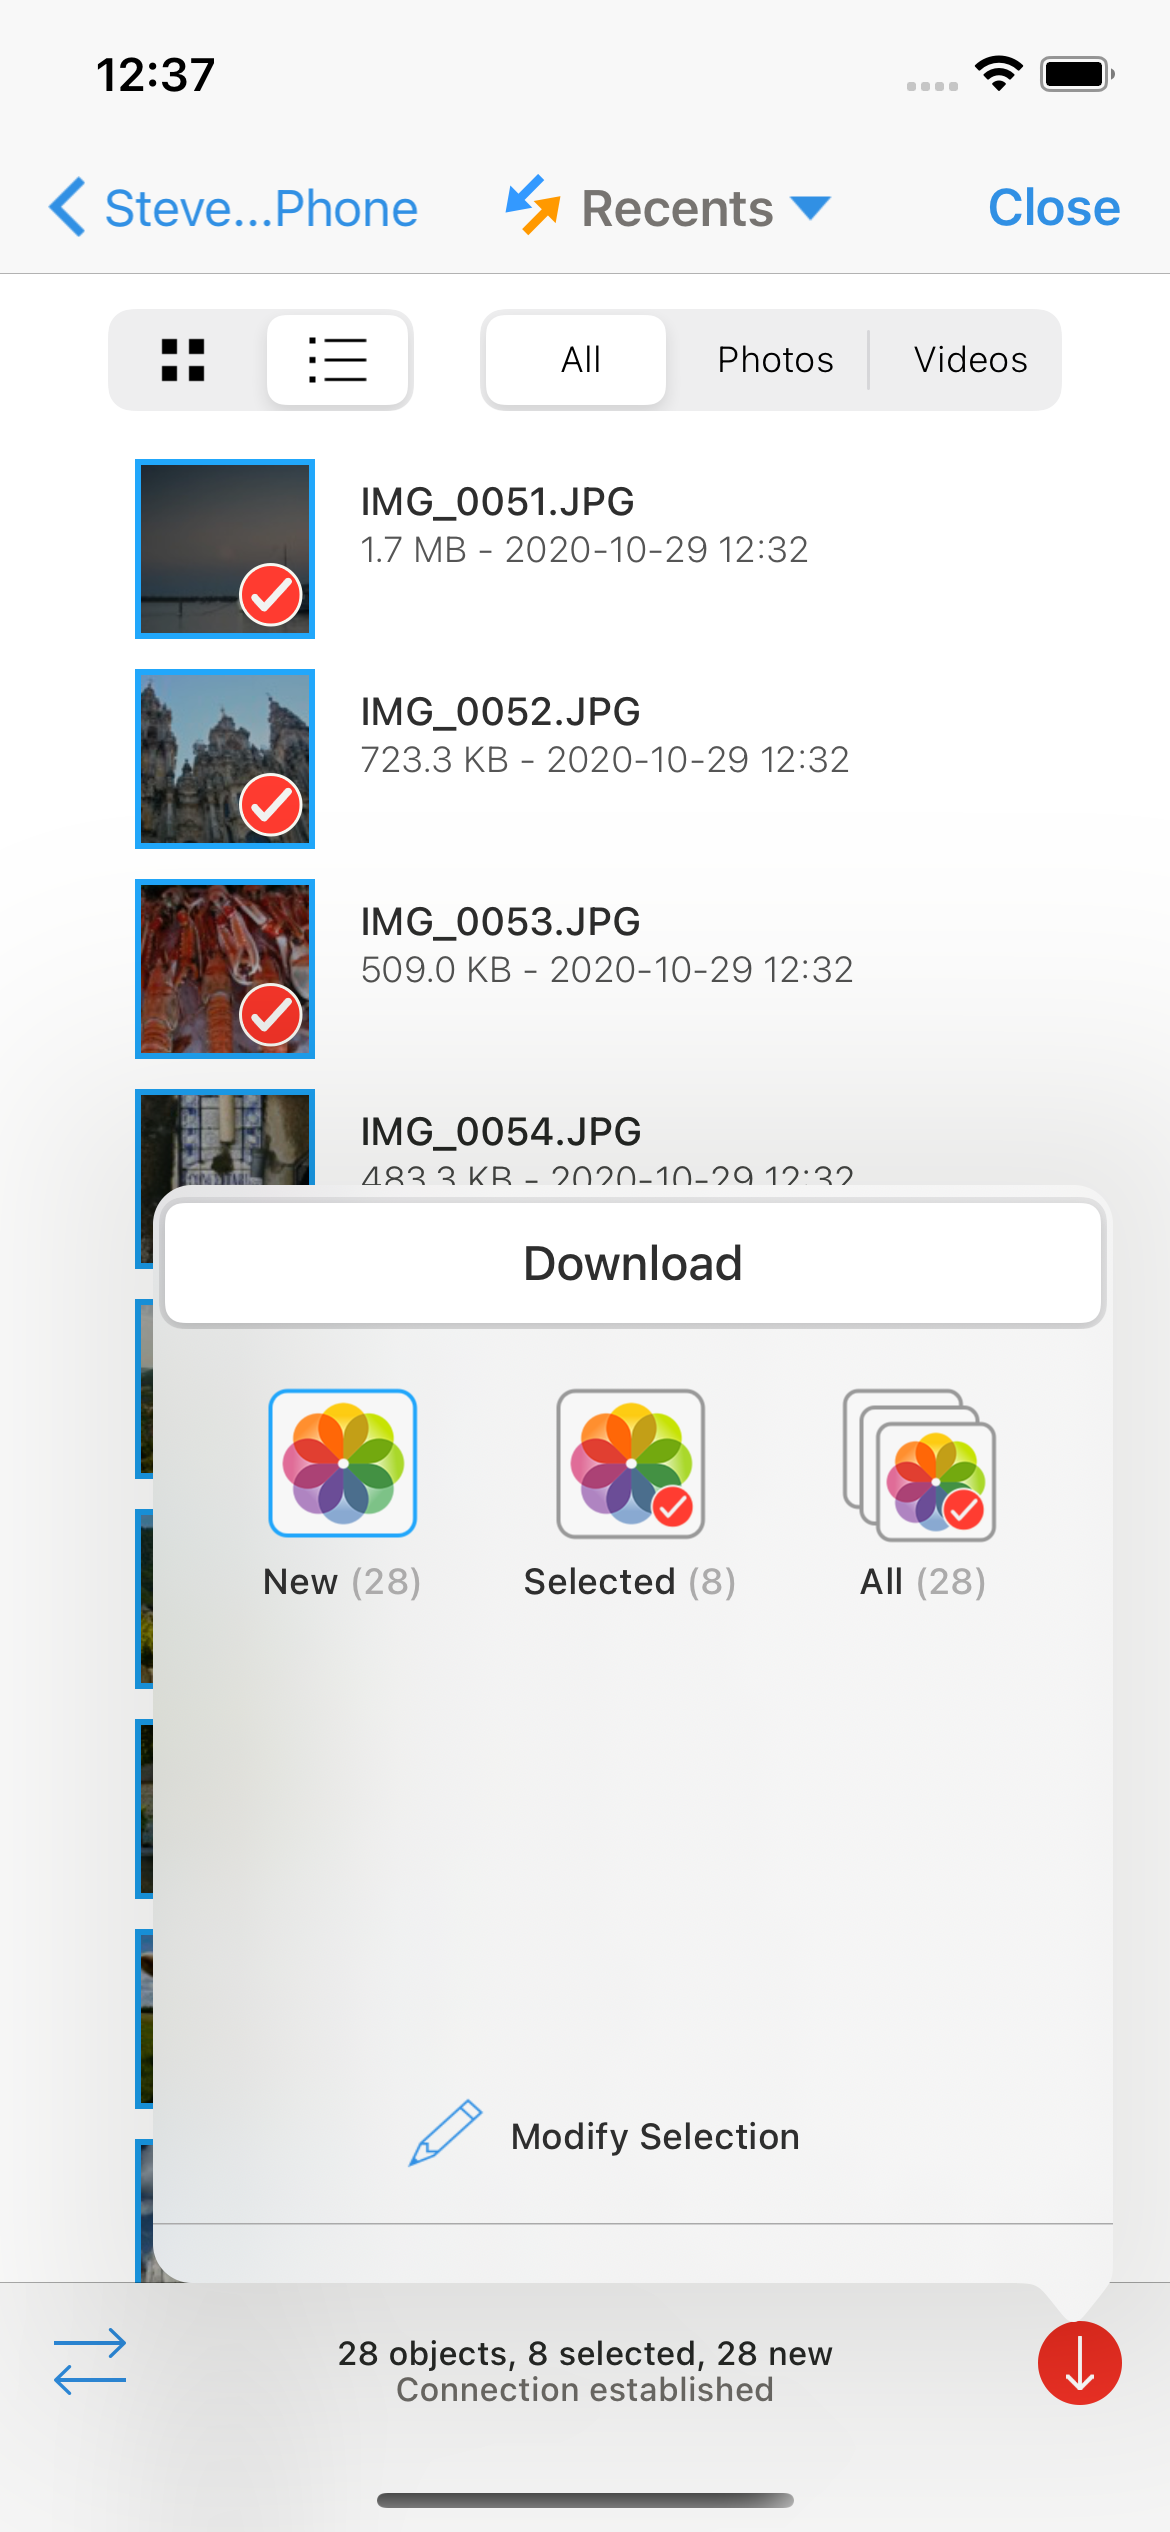 Options for downloading photos